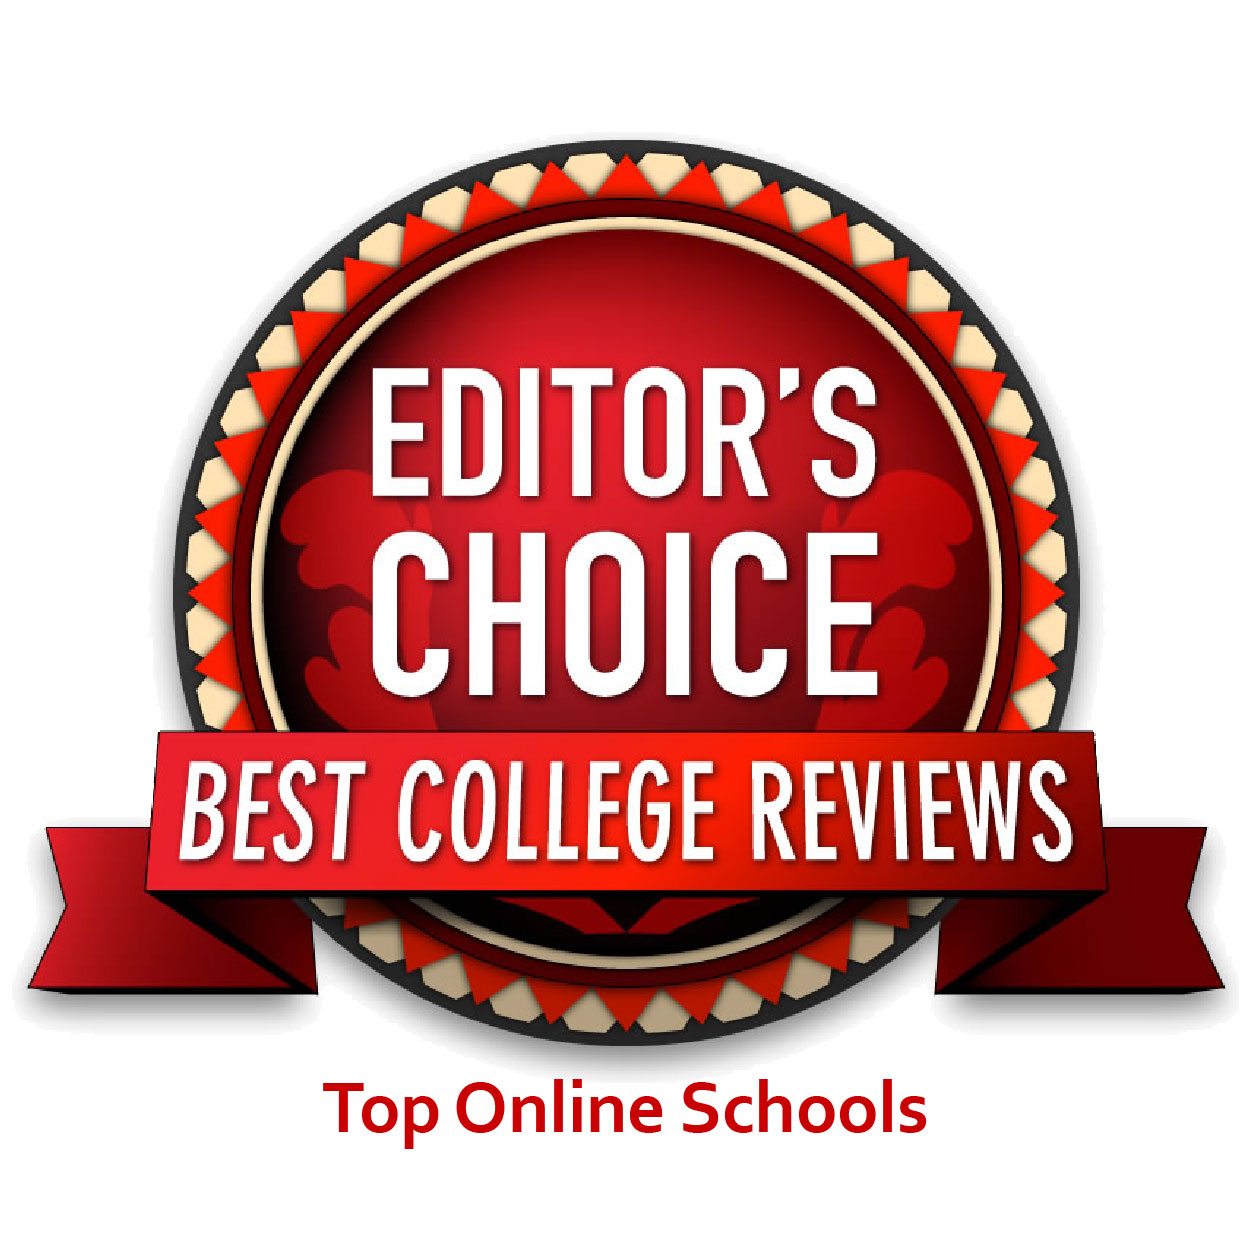 Best College Reviews